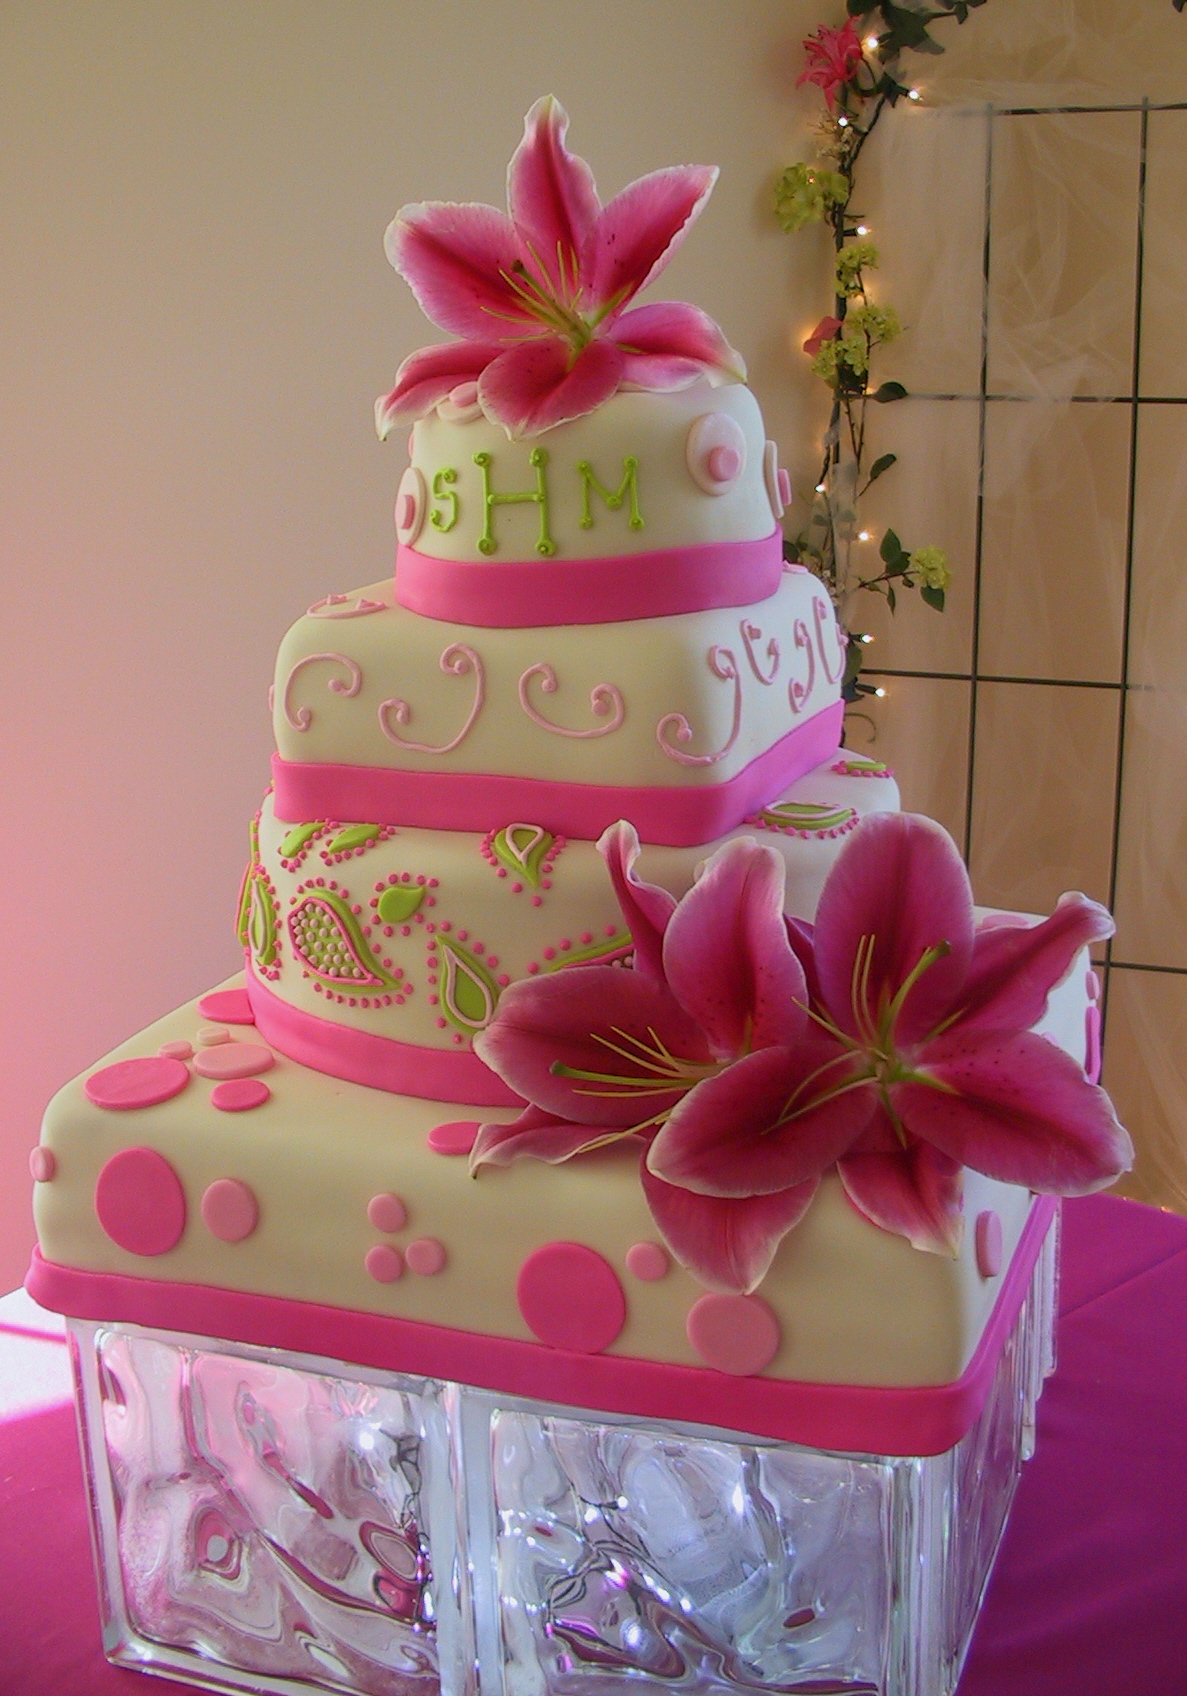 Hot Pink and Green Wedding Cake